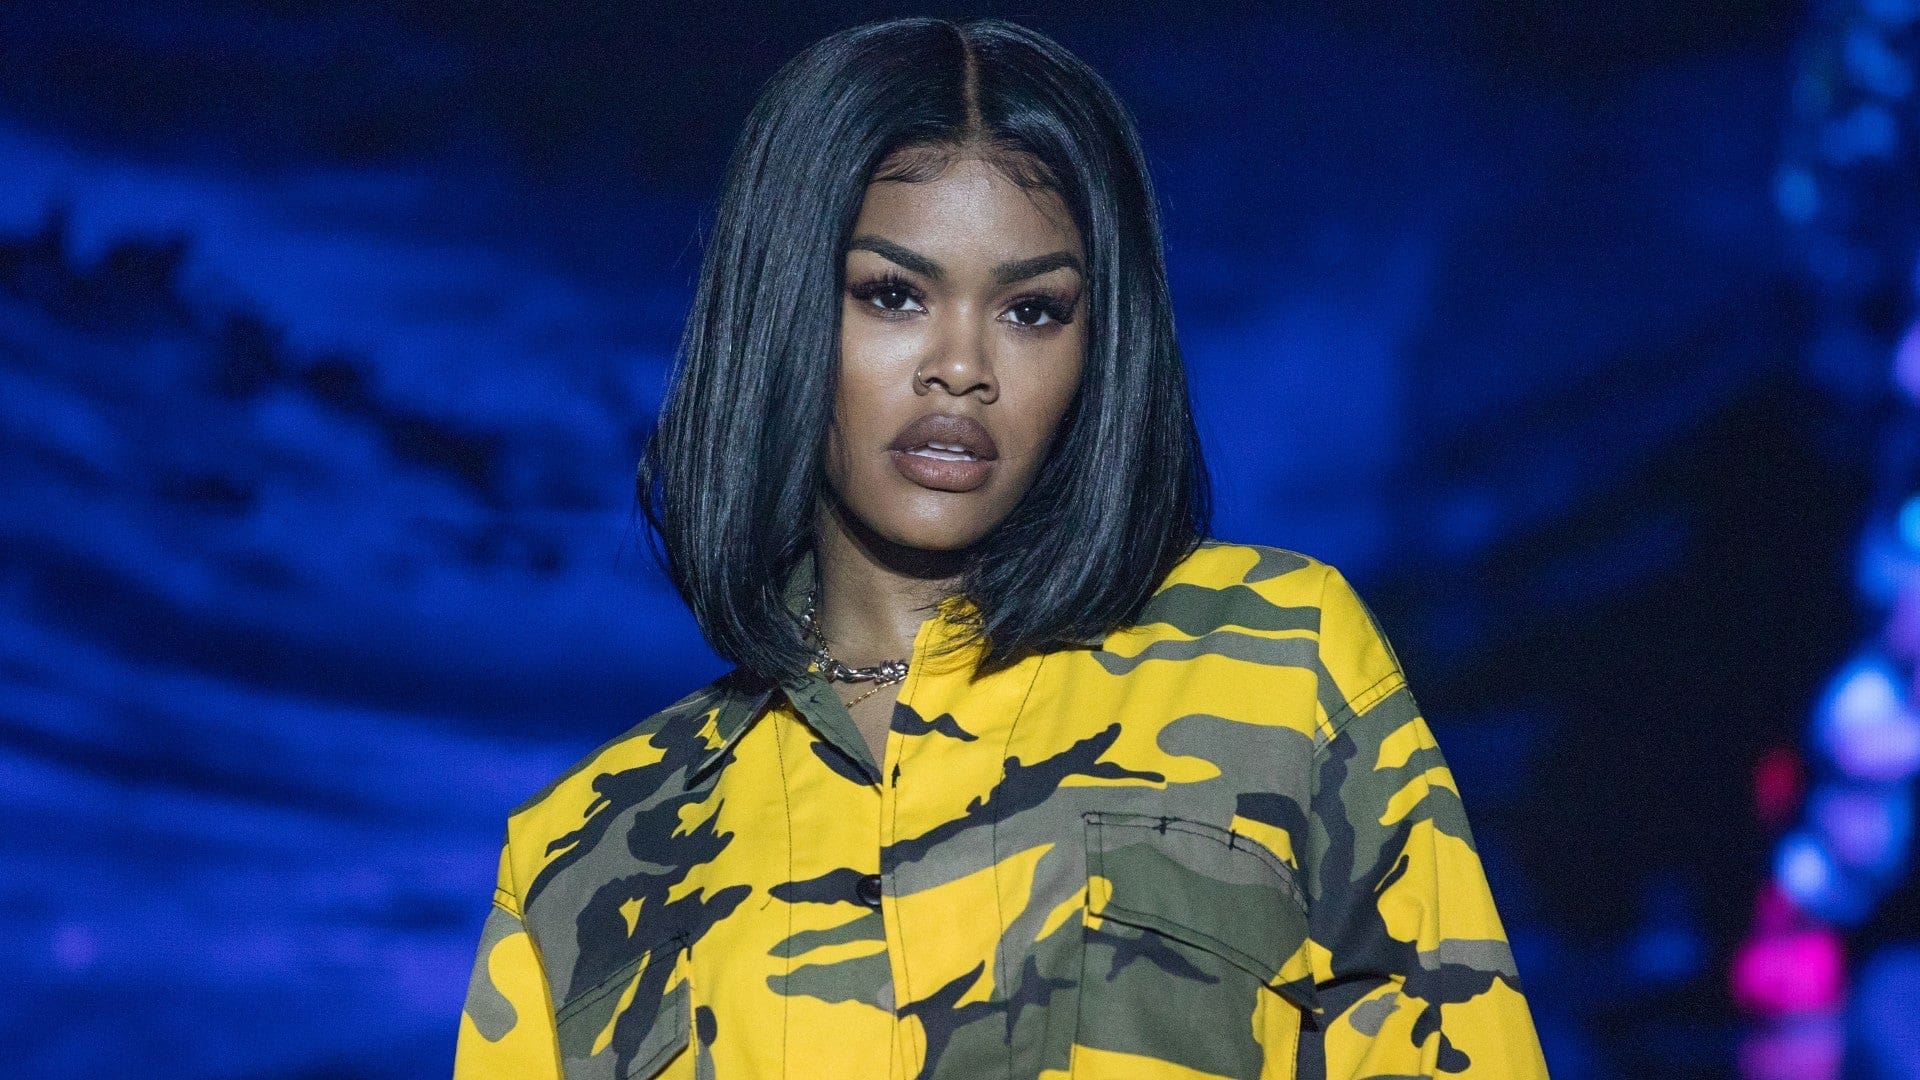 ”teyana-taylor-is-the-first-black-woman-named-as-the-sexiest-woman-alive”